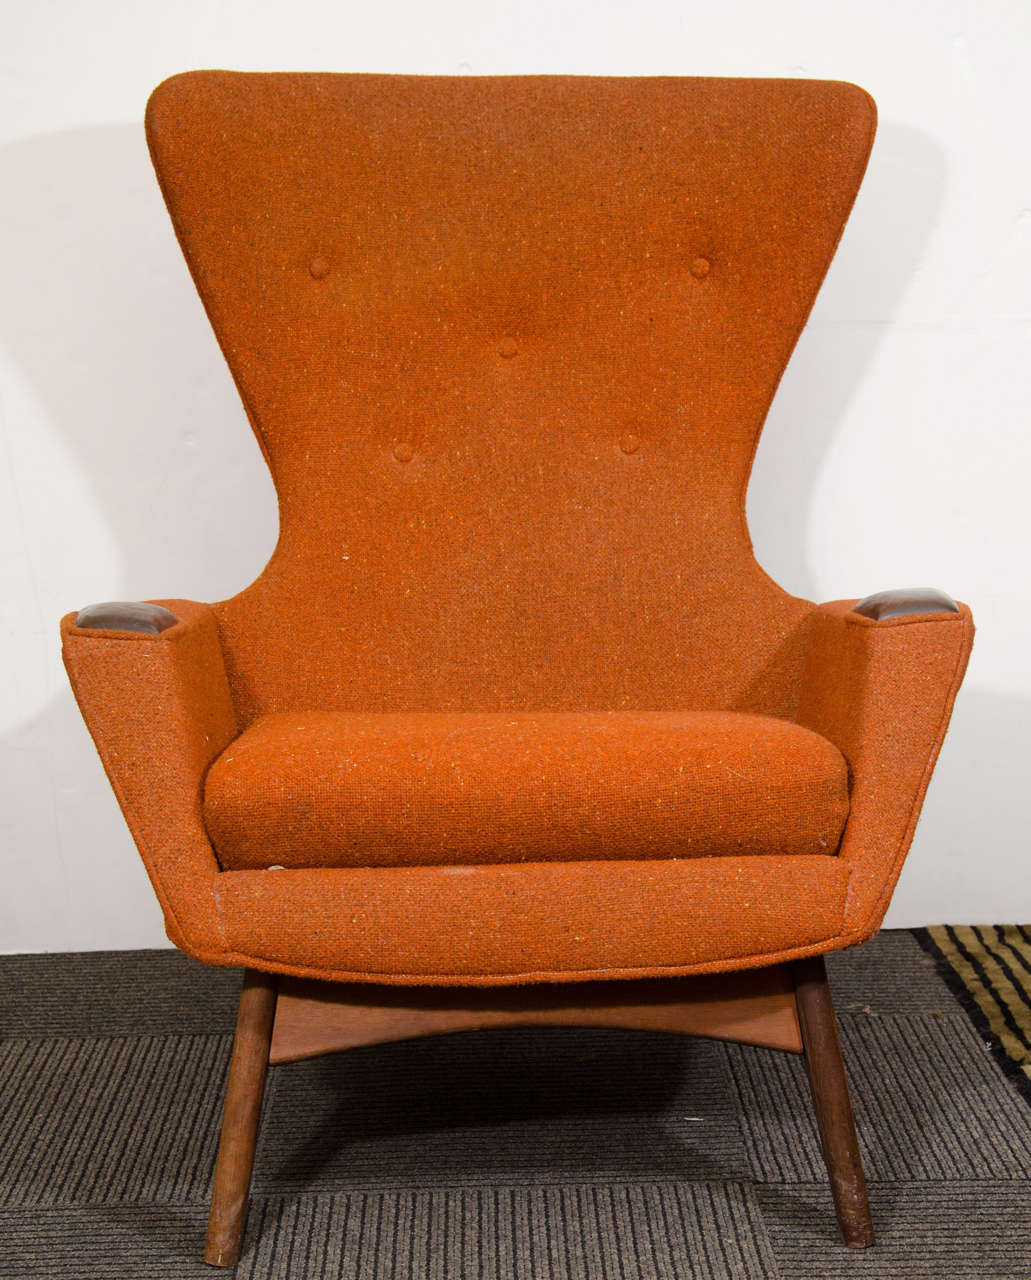 A vintage high back sculptural wing chair in original orange fabric by designer Adrian Pearsall.  

In good vintage condition with age appropriate wear.  Slight fading to upholstery.

Reduced from: $5,500